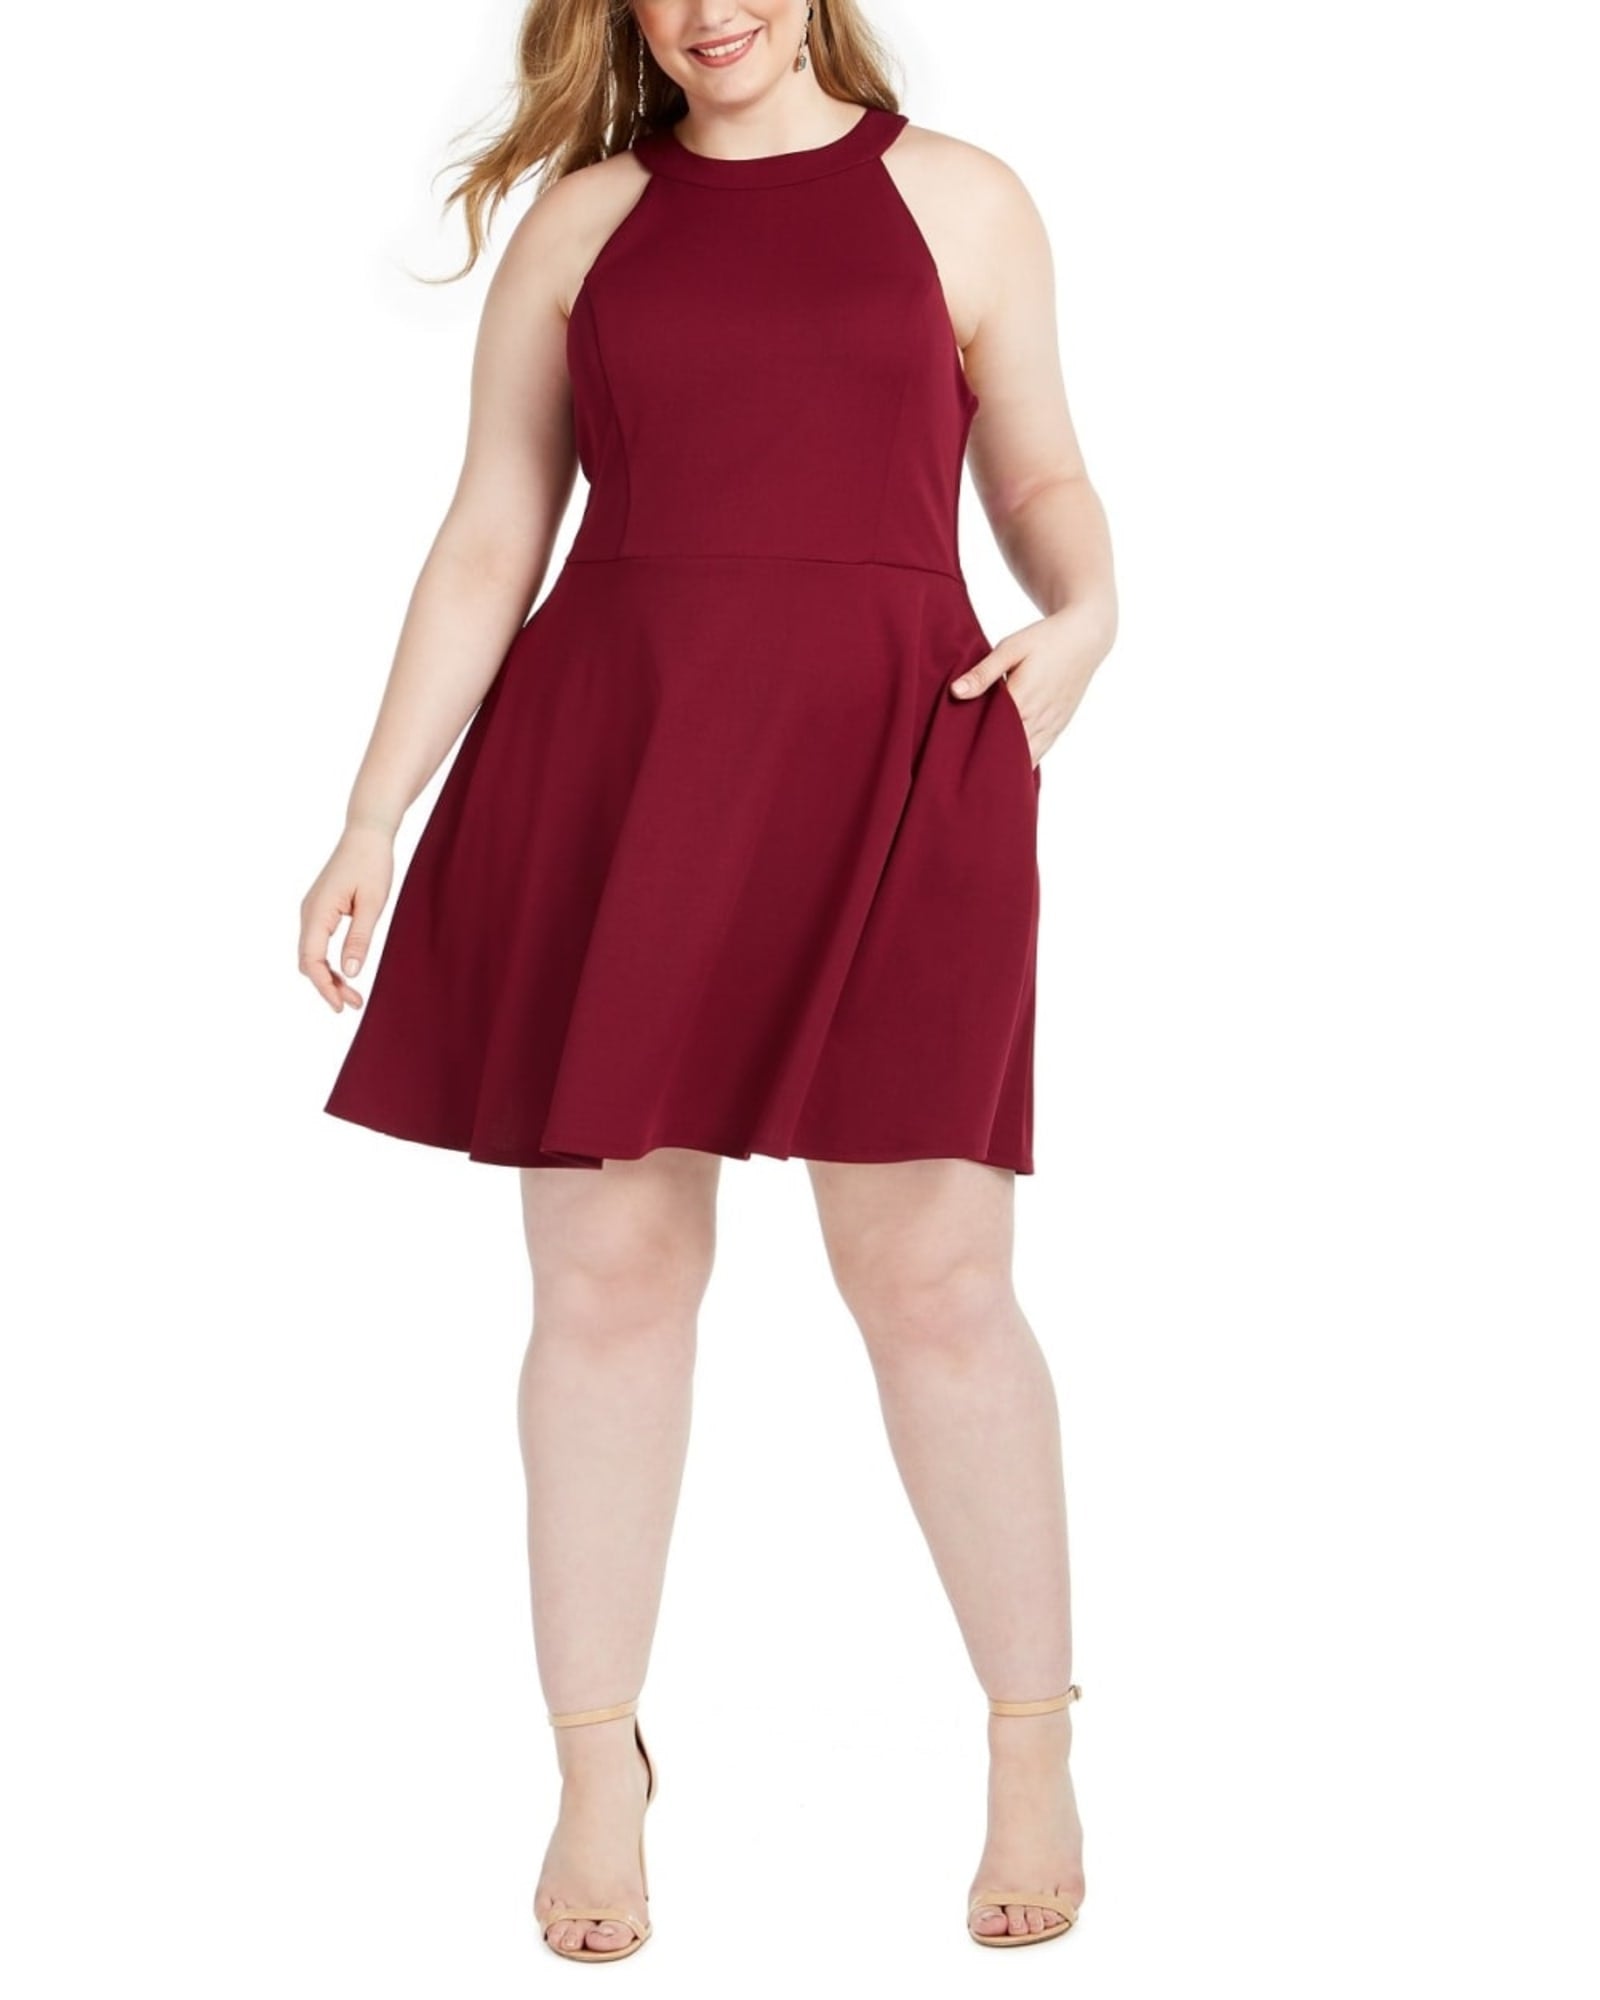 Plus Size Model Outfits